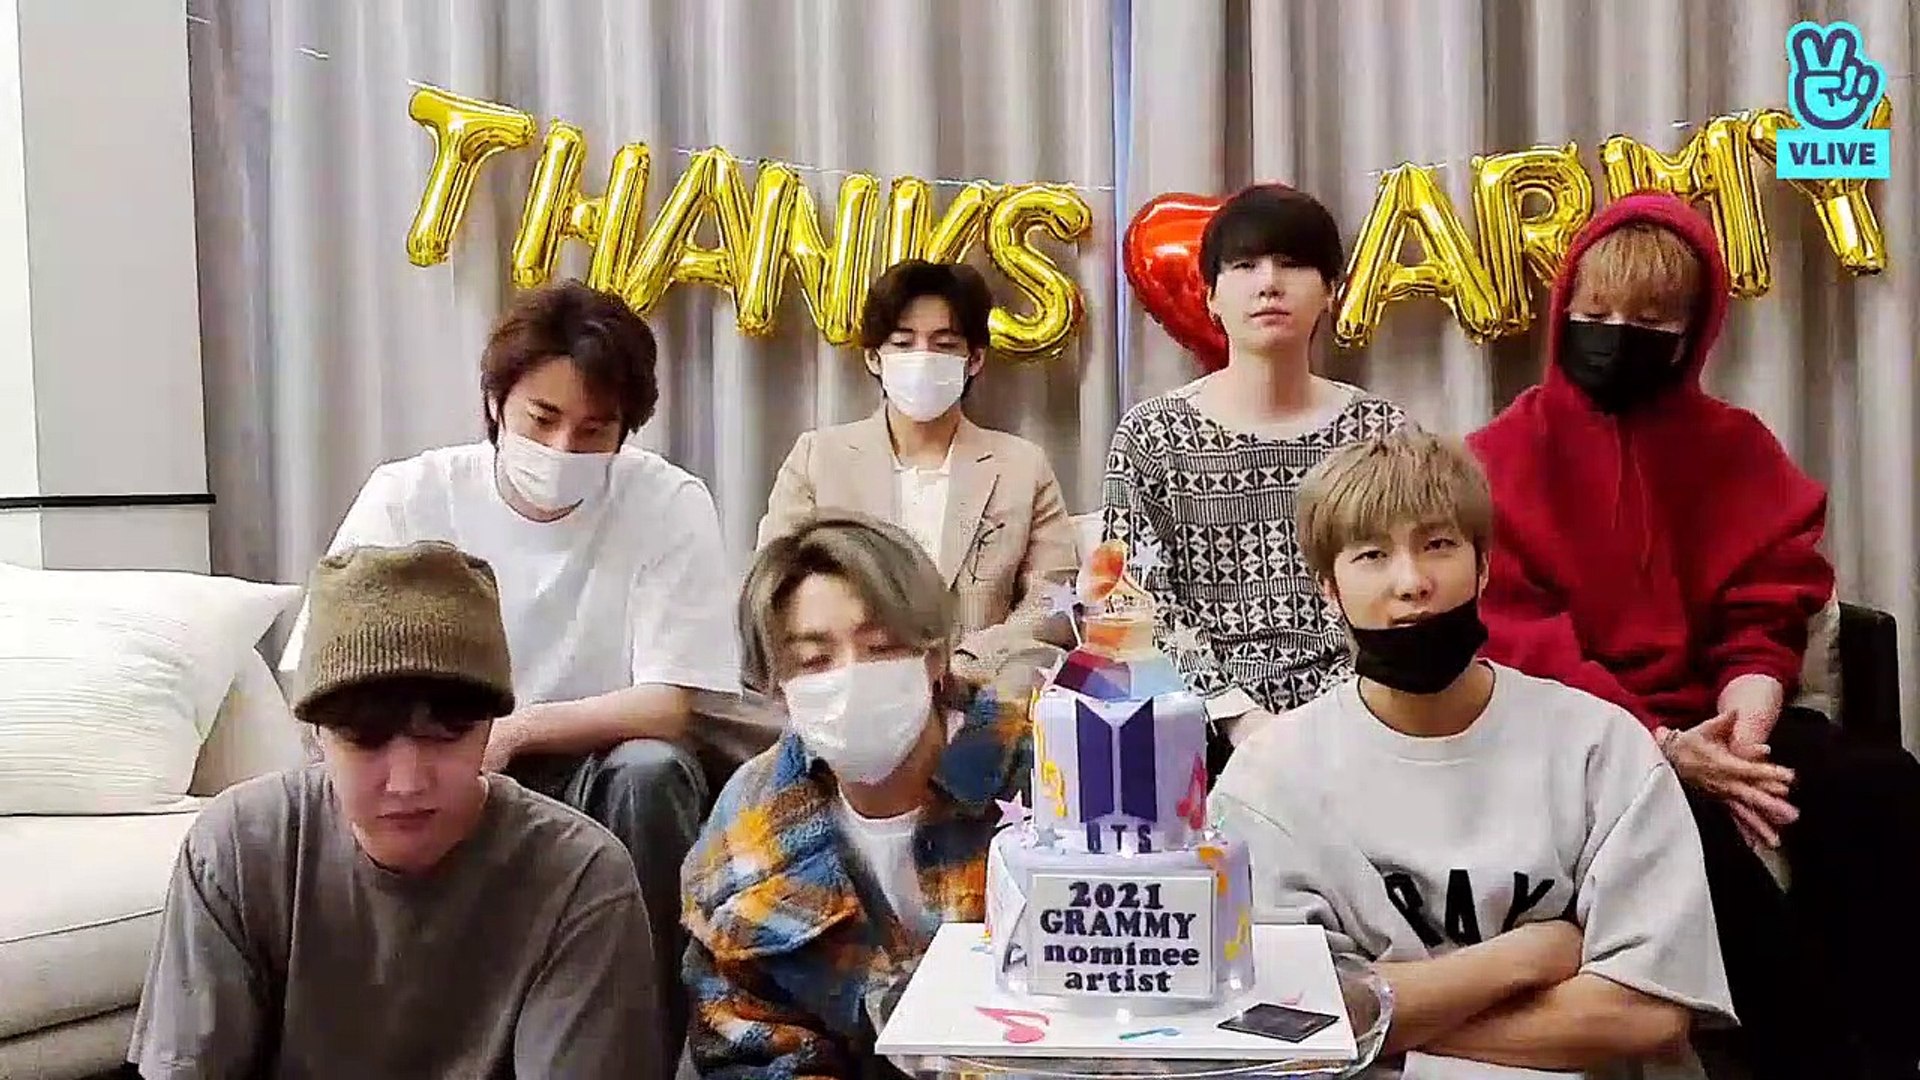 ENG CLOSED CAPTION) BTS GRAMMY VLIVE 2021 THANKS ARMY 15.03.2021